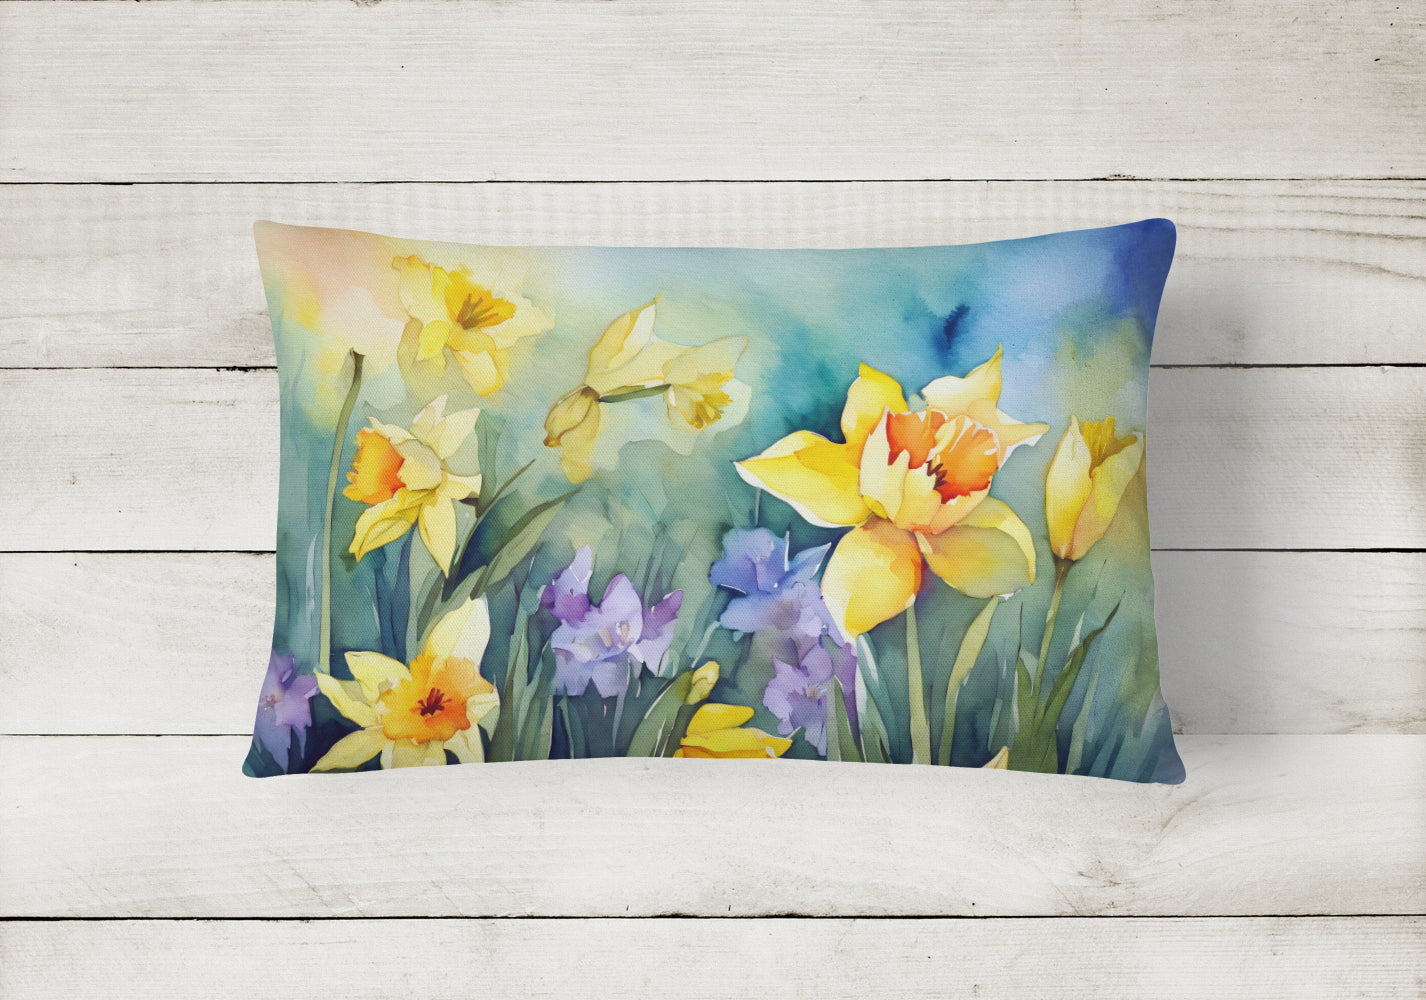 Buy this Daffodils in Watercolor Fabric Decorative Pillow